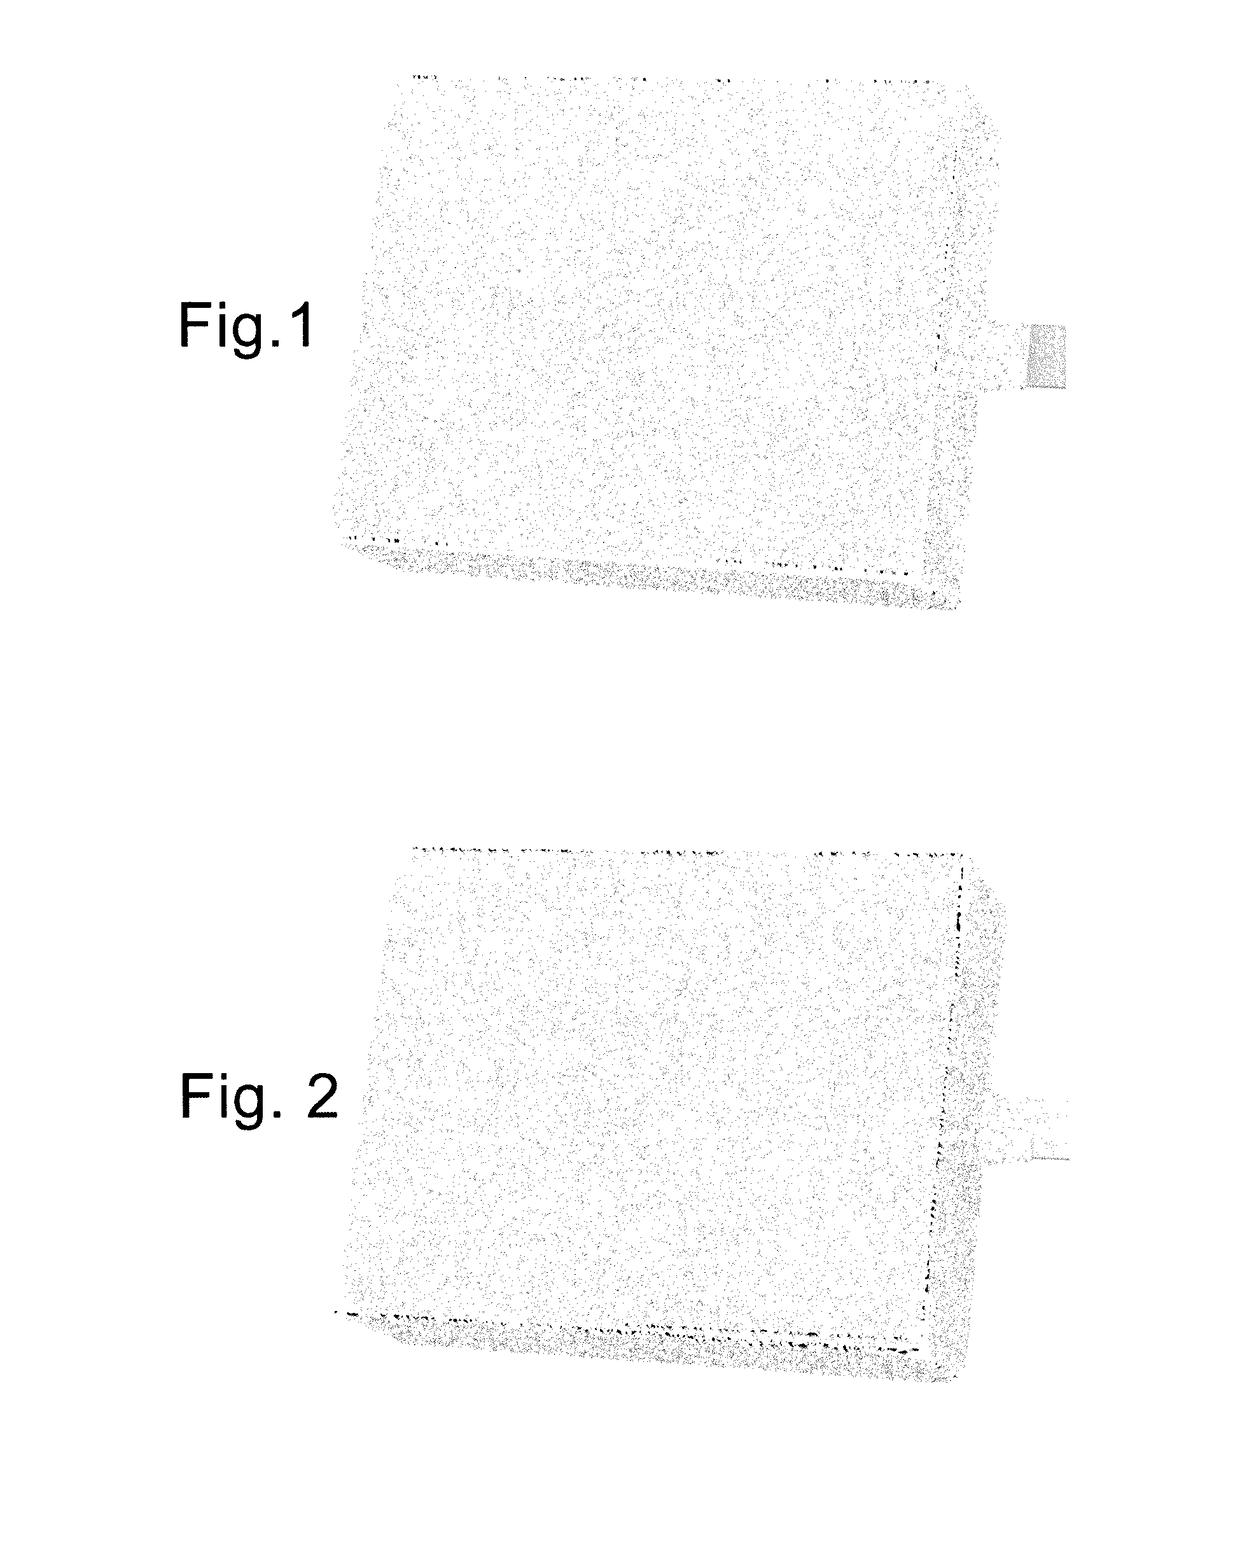 Conductive Polymer Dispersion with Enhanced Coverage